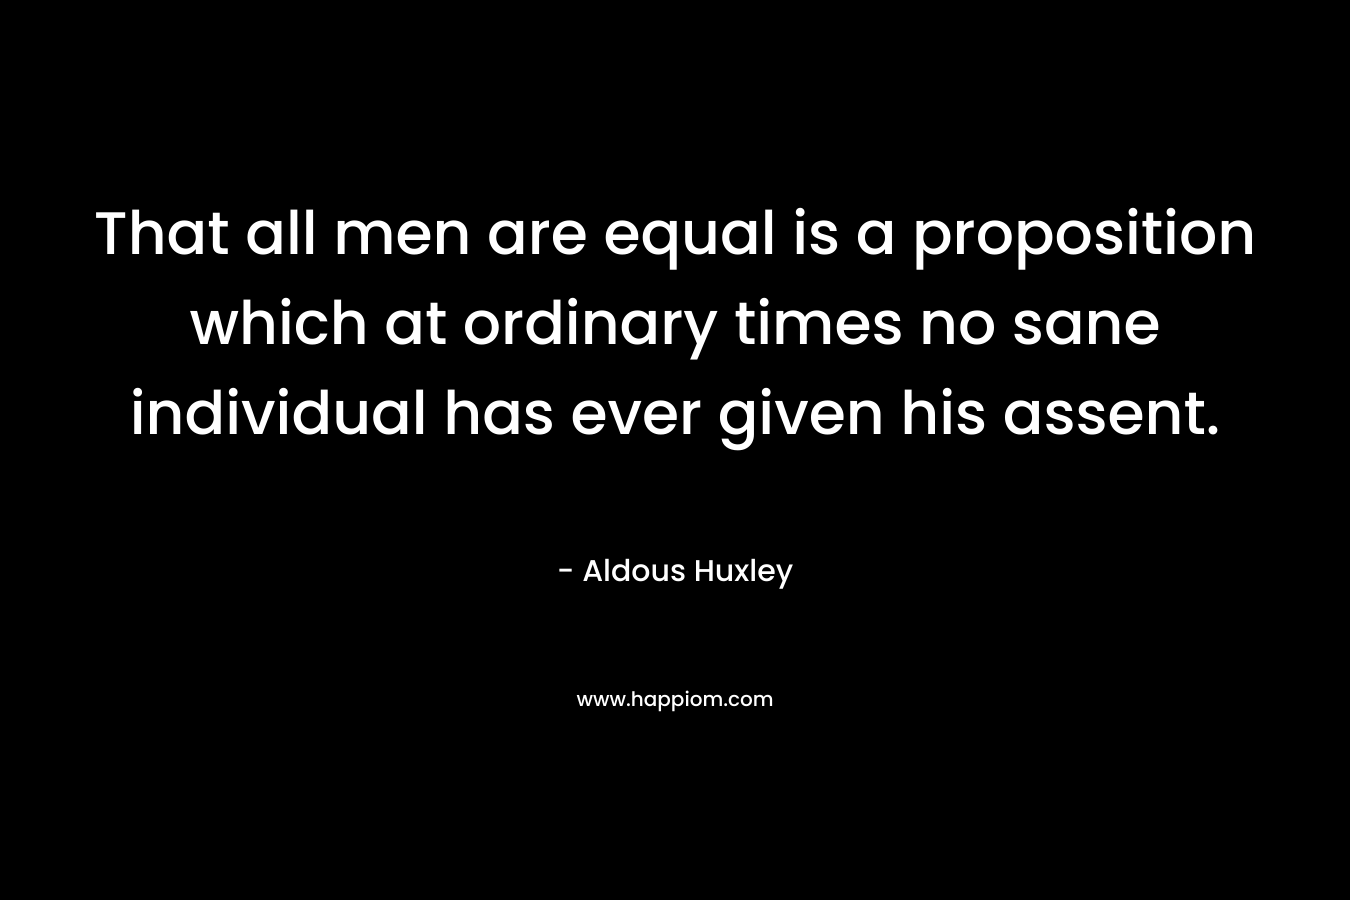 That all men are equal is a proposition which at ordinary times no sane individual has ever given his assent.